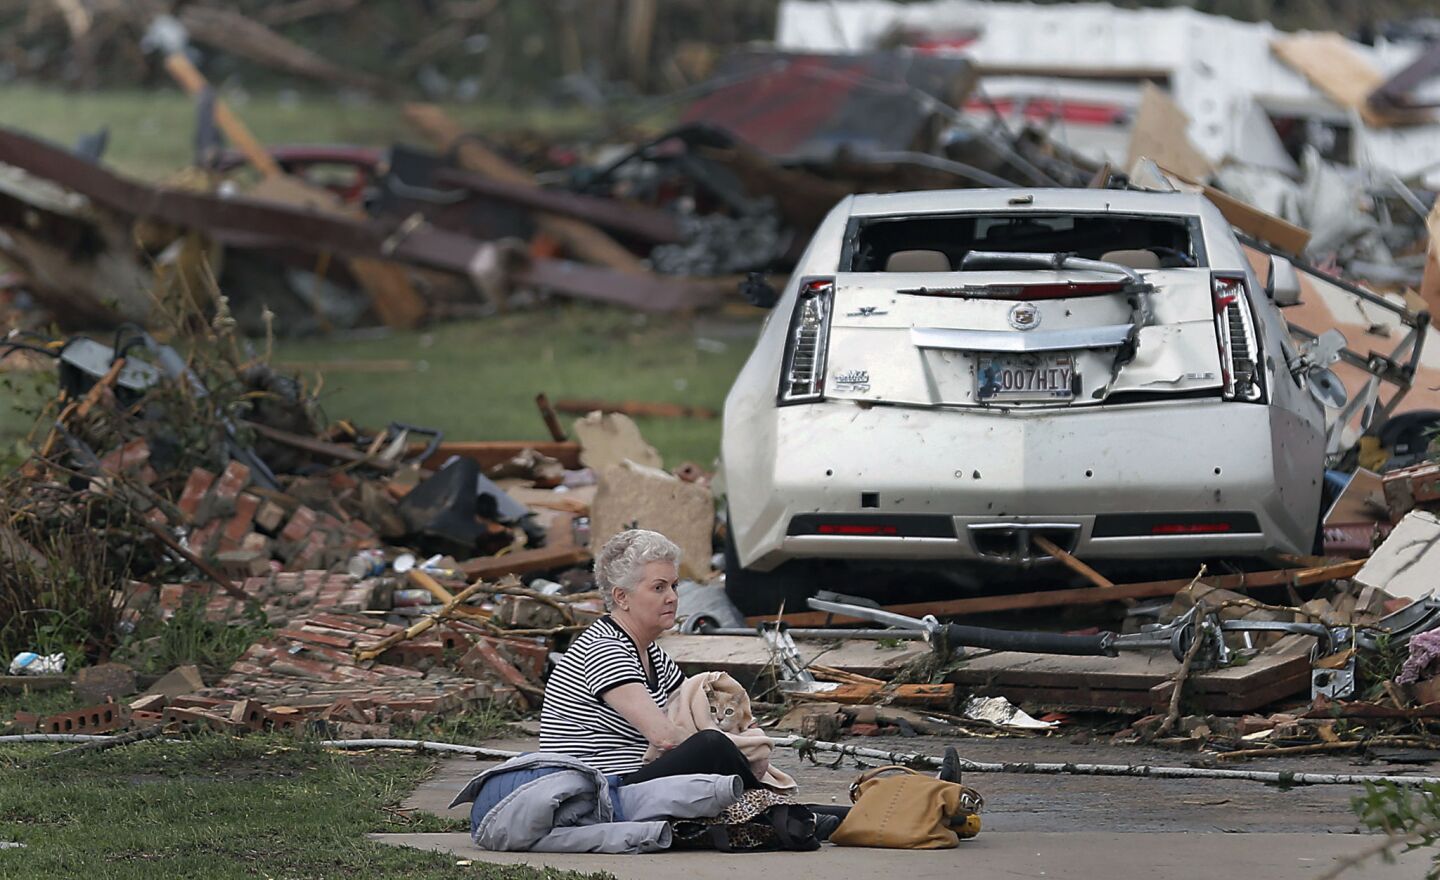 Kay James holds her cat as she sits in her driveway after her home was destroyed by the tornado that hit near Oklahoma City.